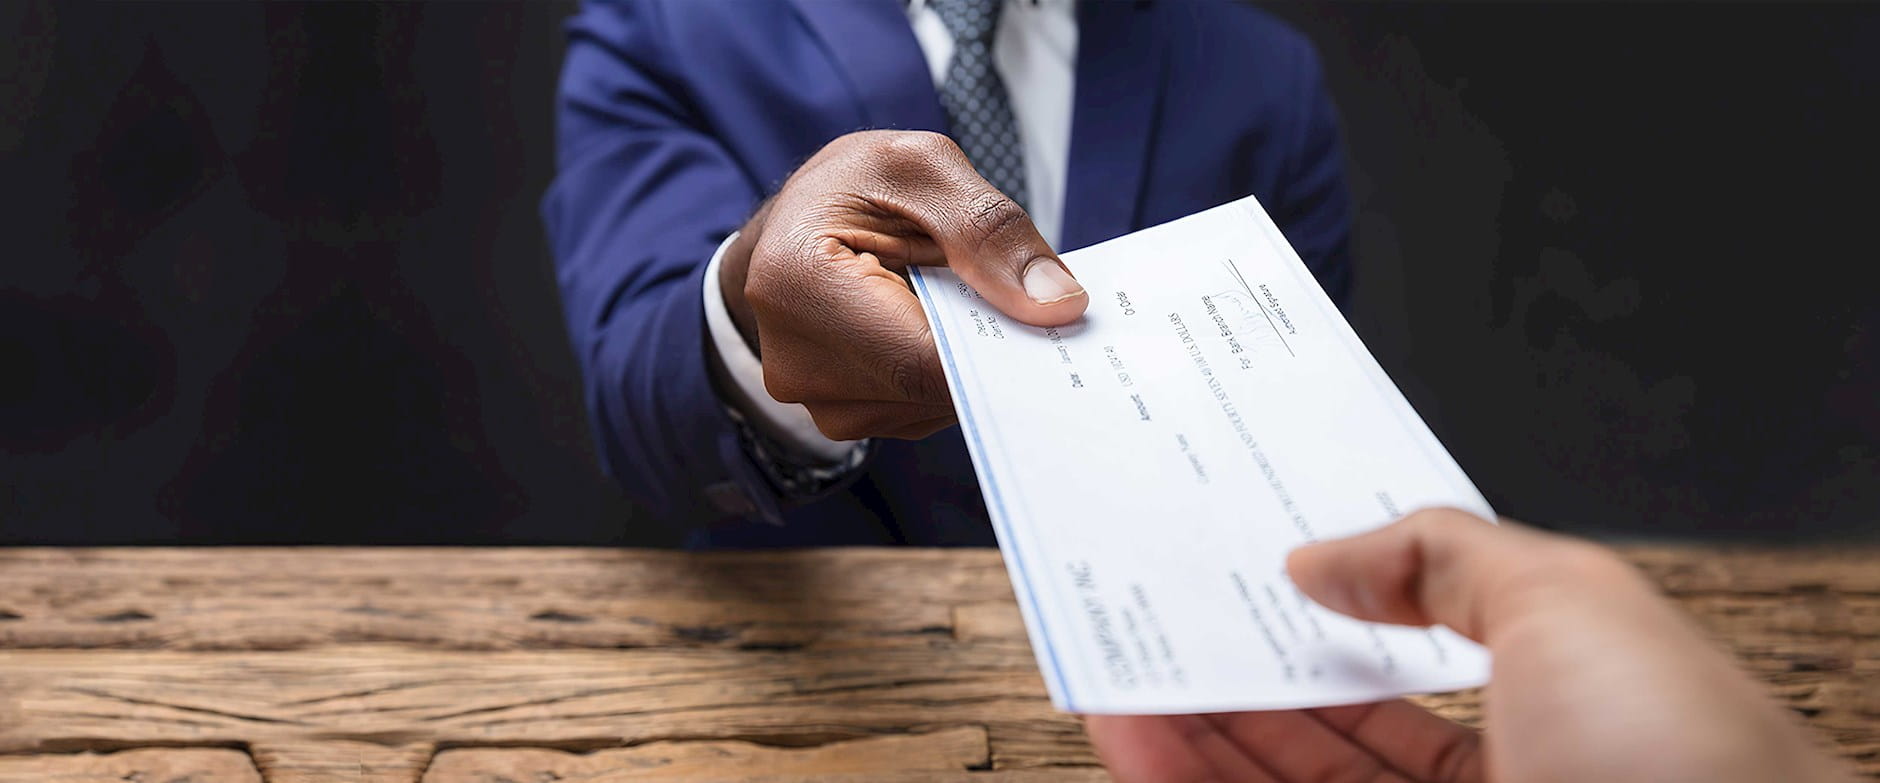 Close up of a person handing a check to another person